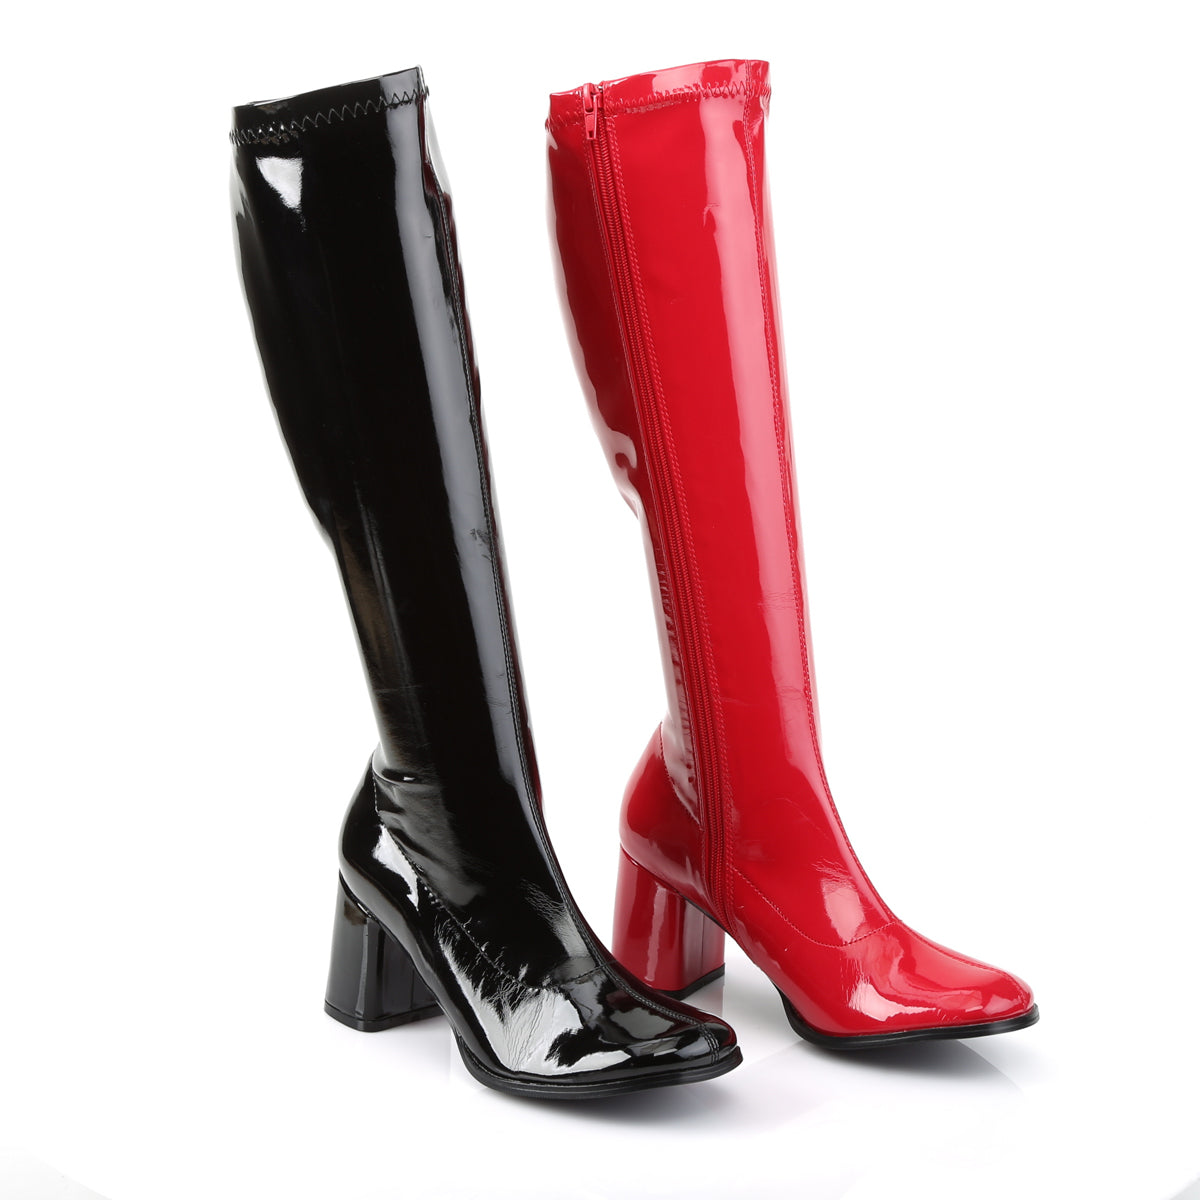 GOGO-300HQ 3 Inch Heel Black and Red Women's Boots Funtasma Costume Shoes Alternative Footwear